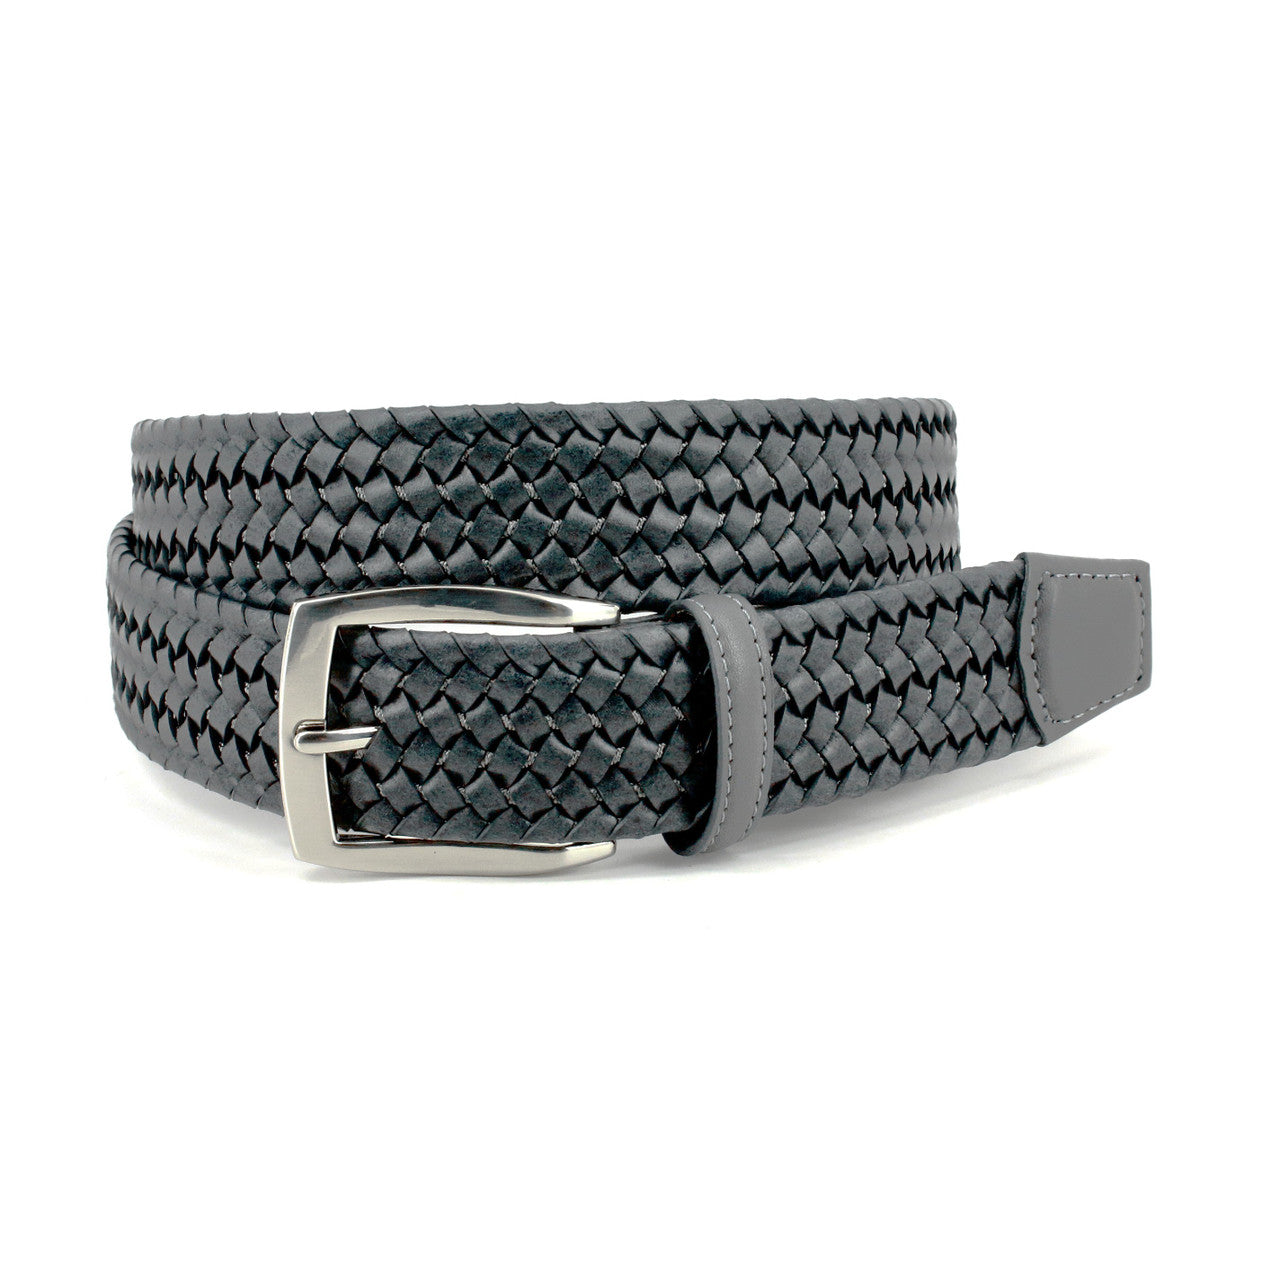 Italian Woven Stretch Leather Belt in Grey by Torino Leather